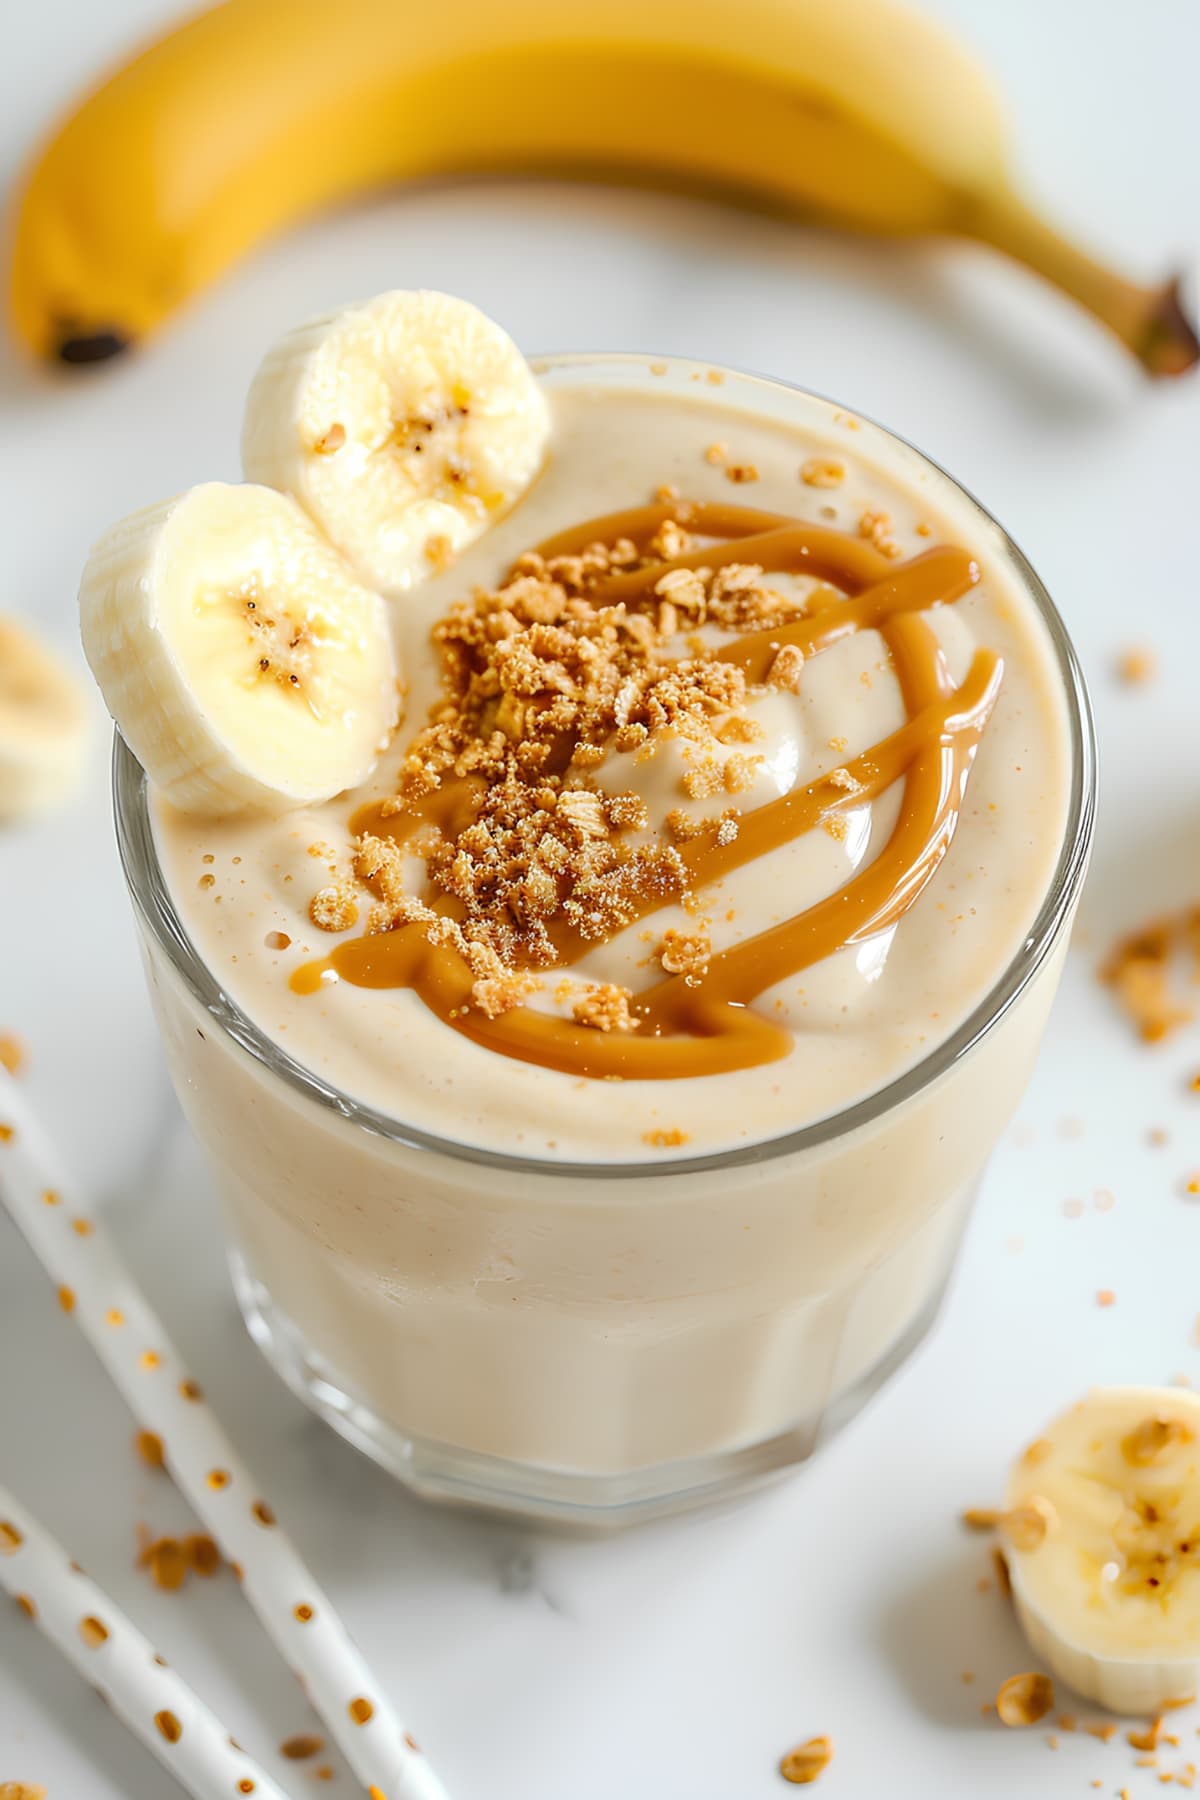 A delicious smoothie made with ripe bananas and creamy peanut butter, perfect for a healthy and satisfying treat